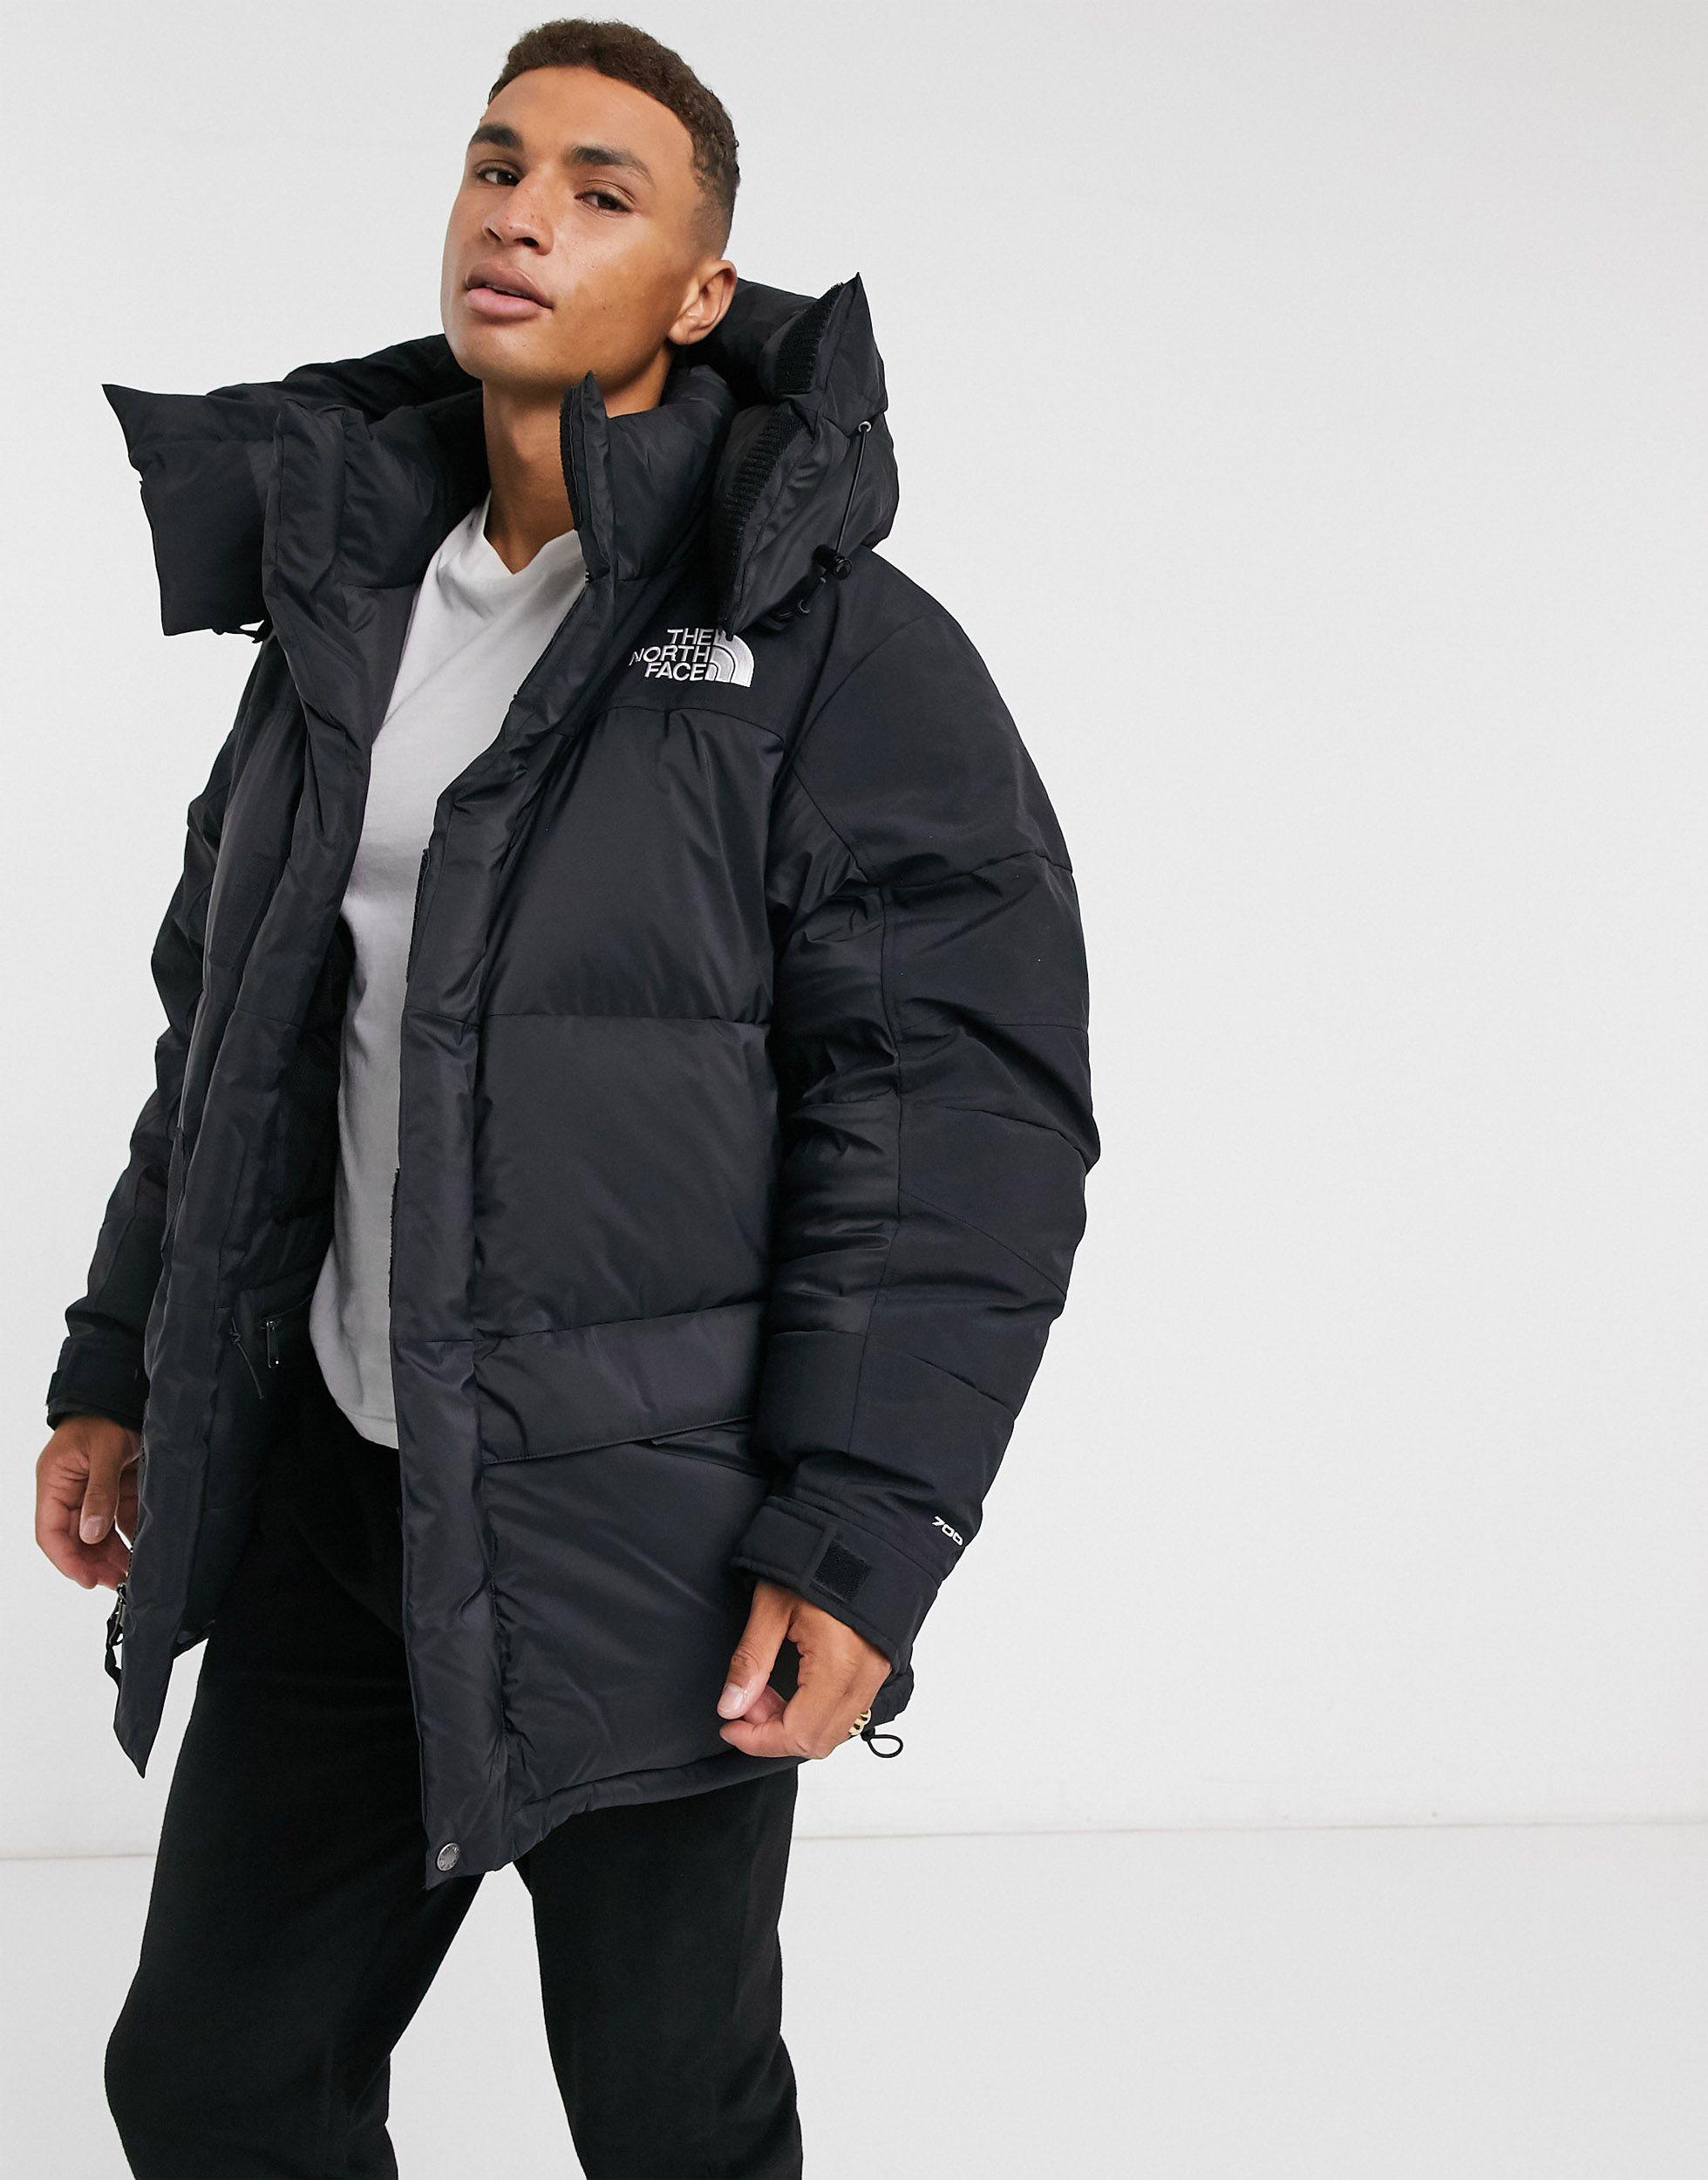 The North Face Retro Himalayan Parka Jacket in Black for Men - Lyst